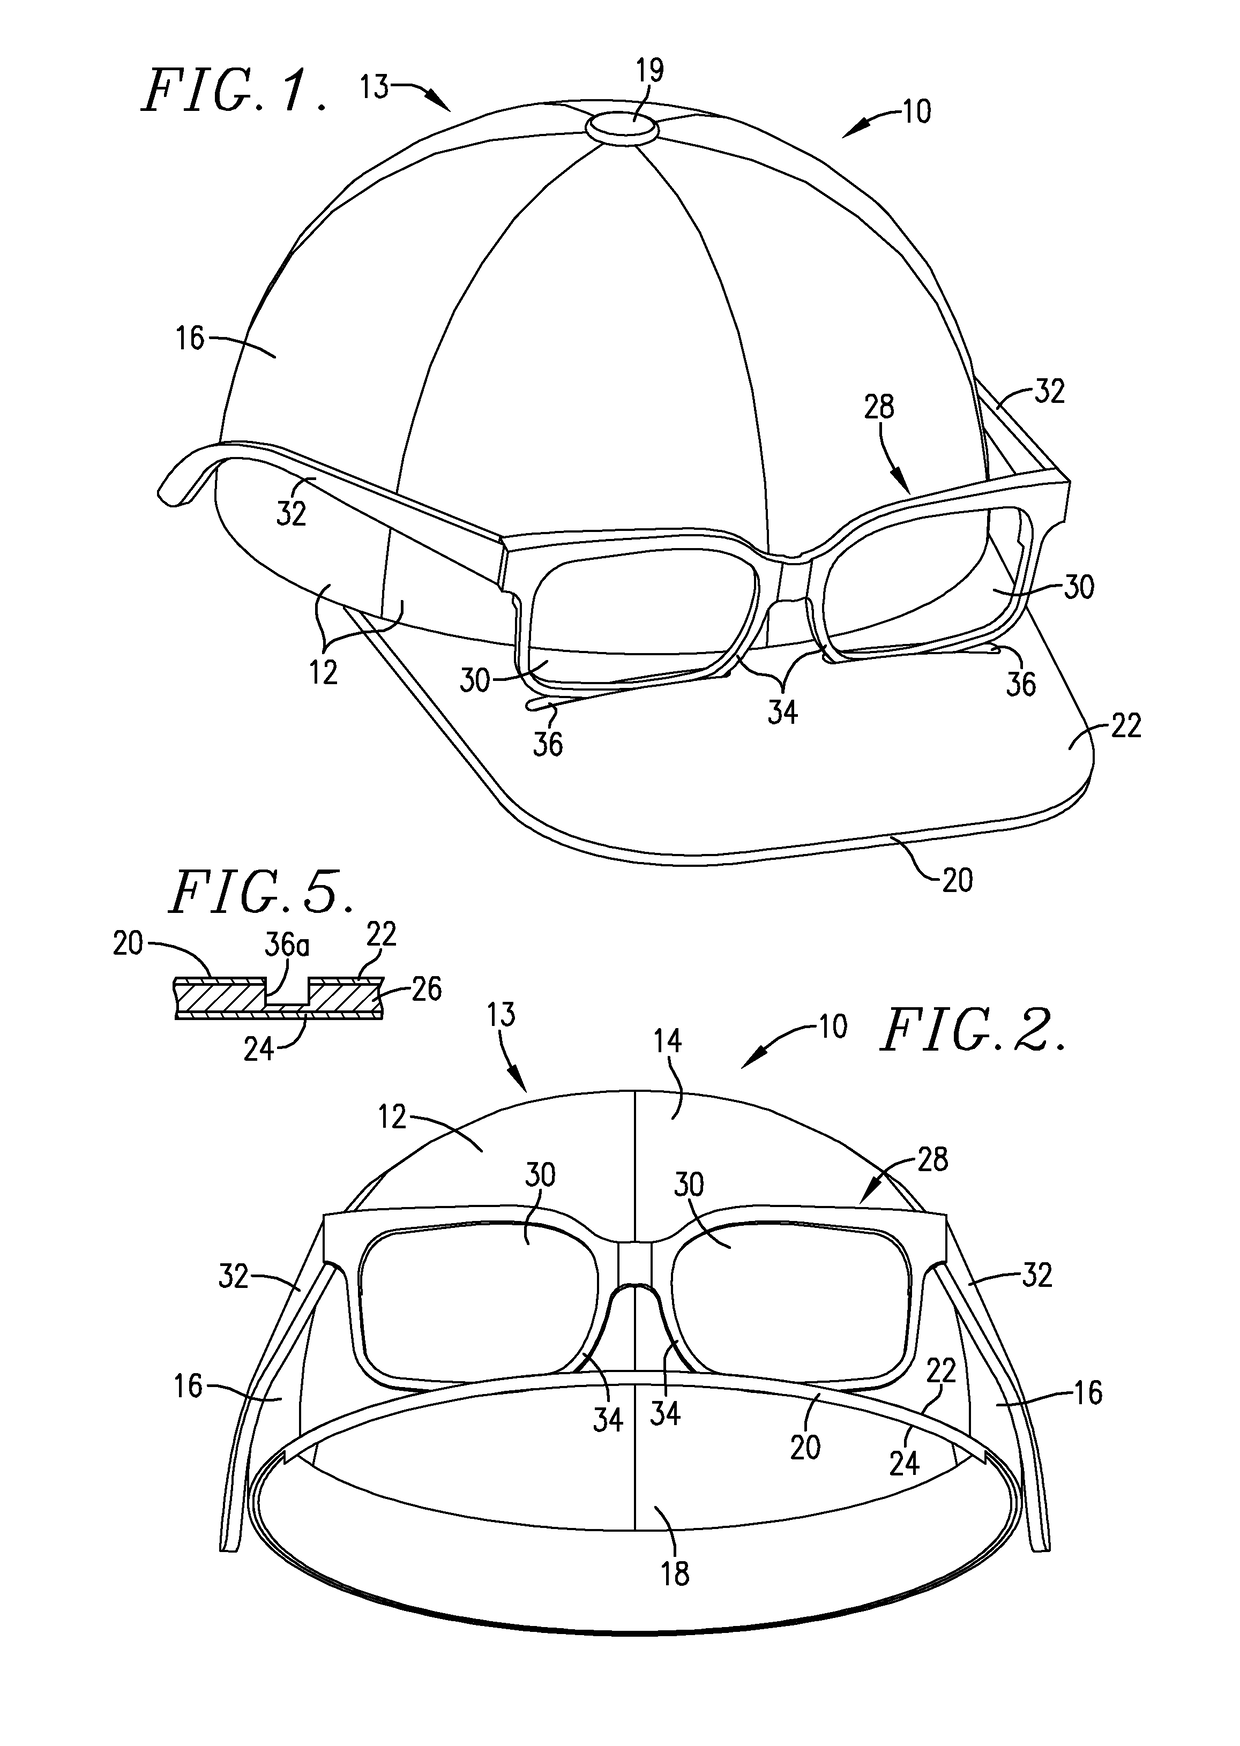 Ball cap with slotted bill for eyeglass retention